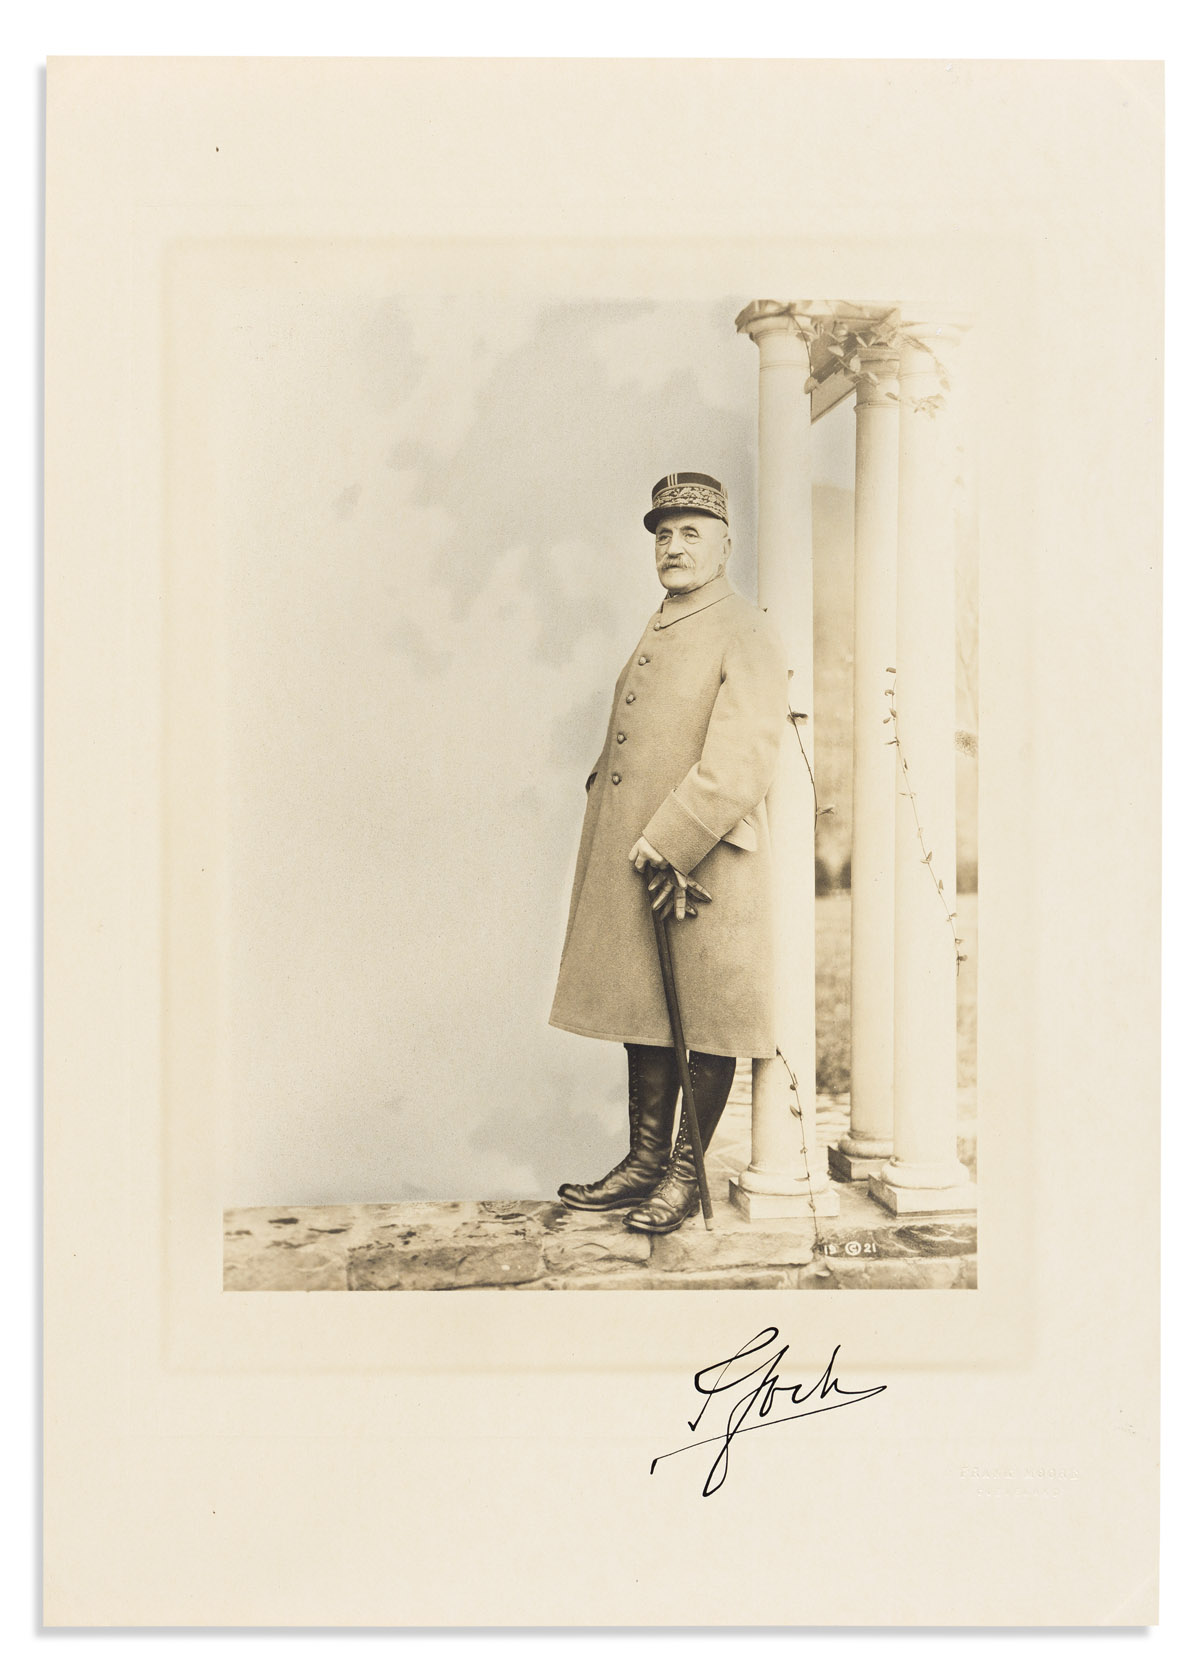 FOCH, FERDINAND. Photograph Signed, FFoch, full-length hand-tinted portrait by Frank Moore,